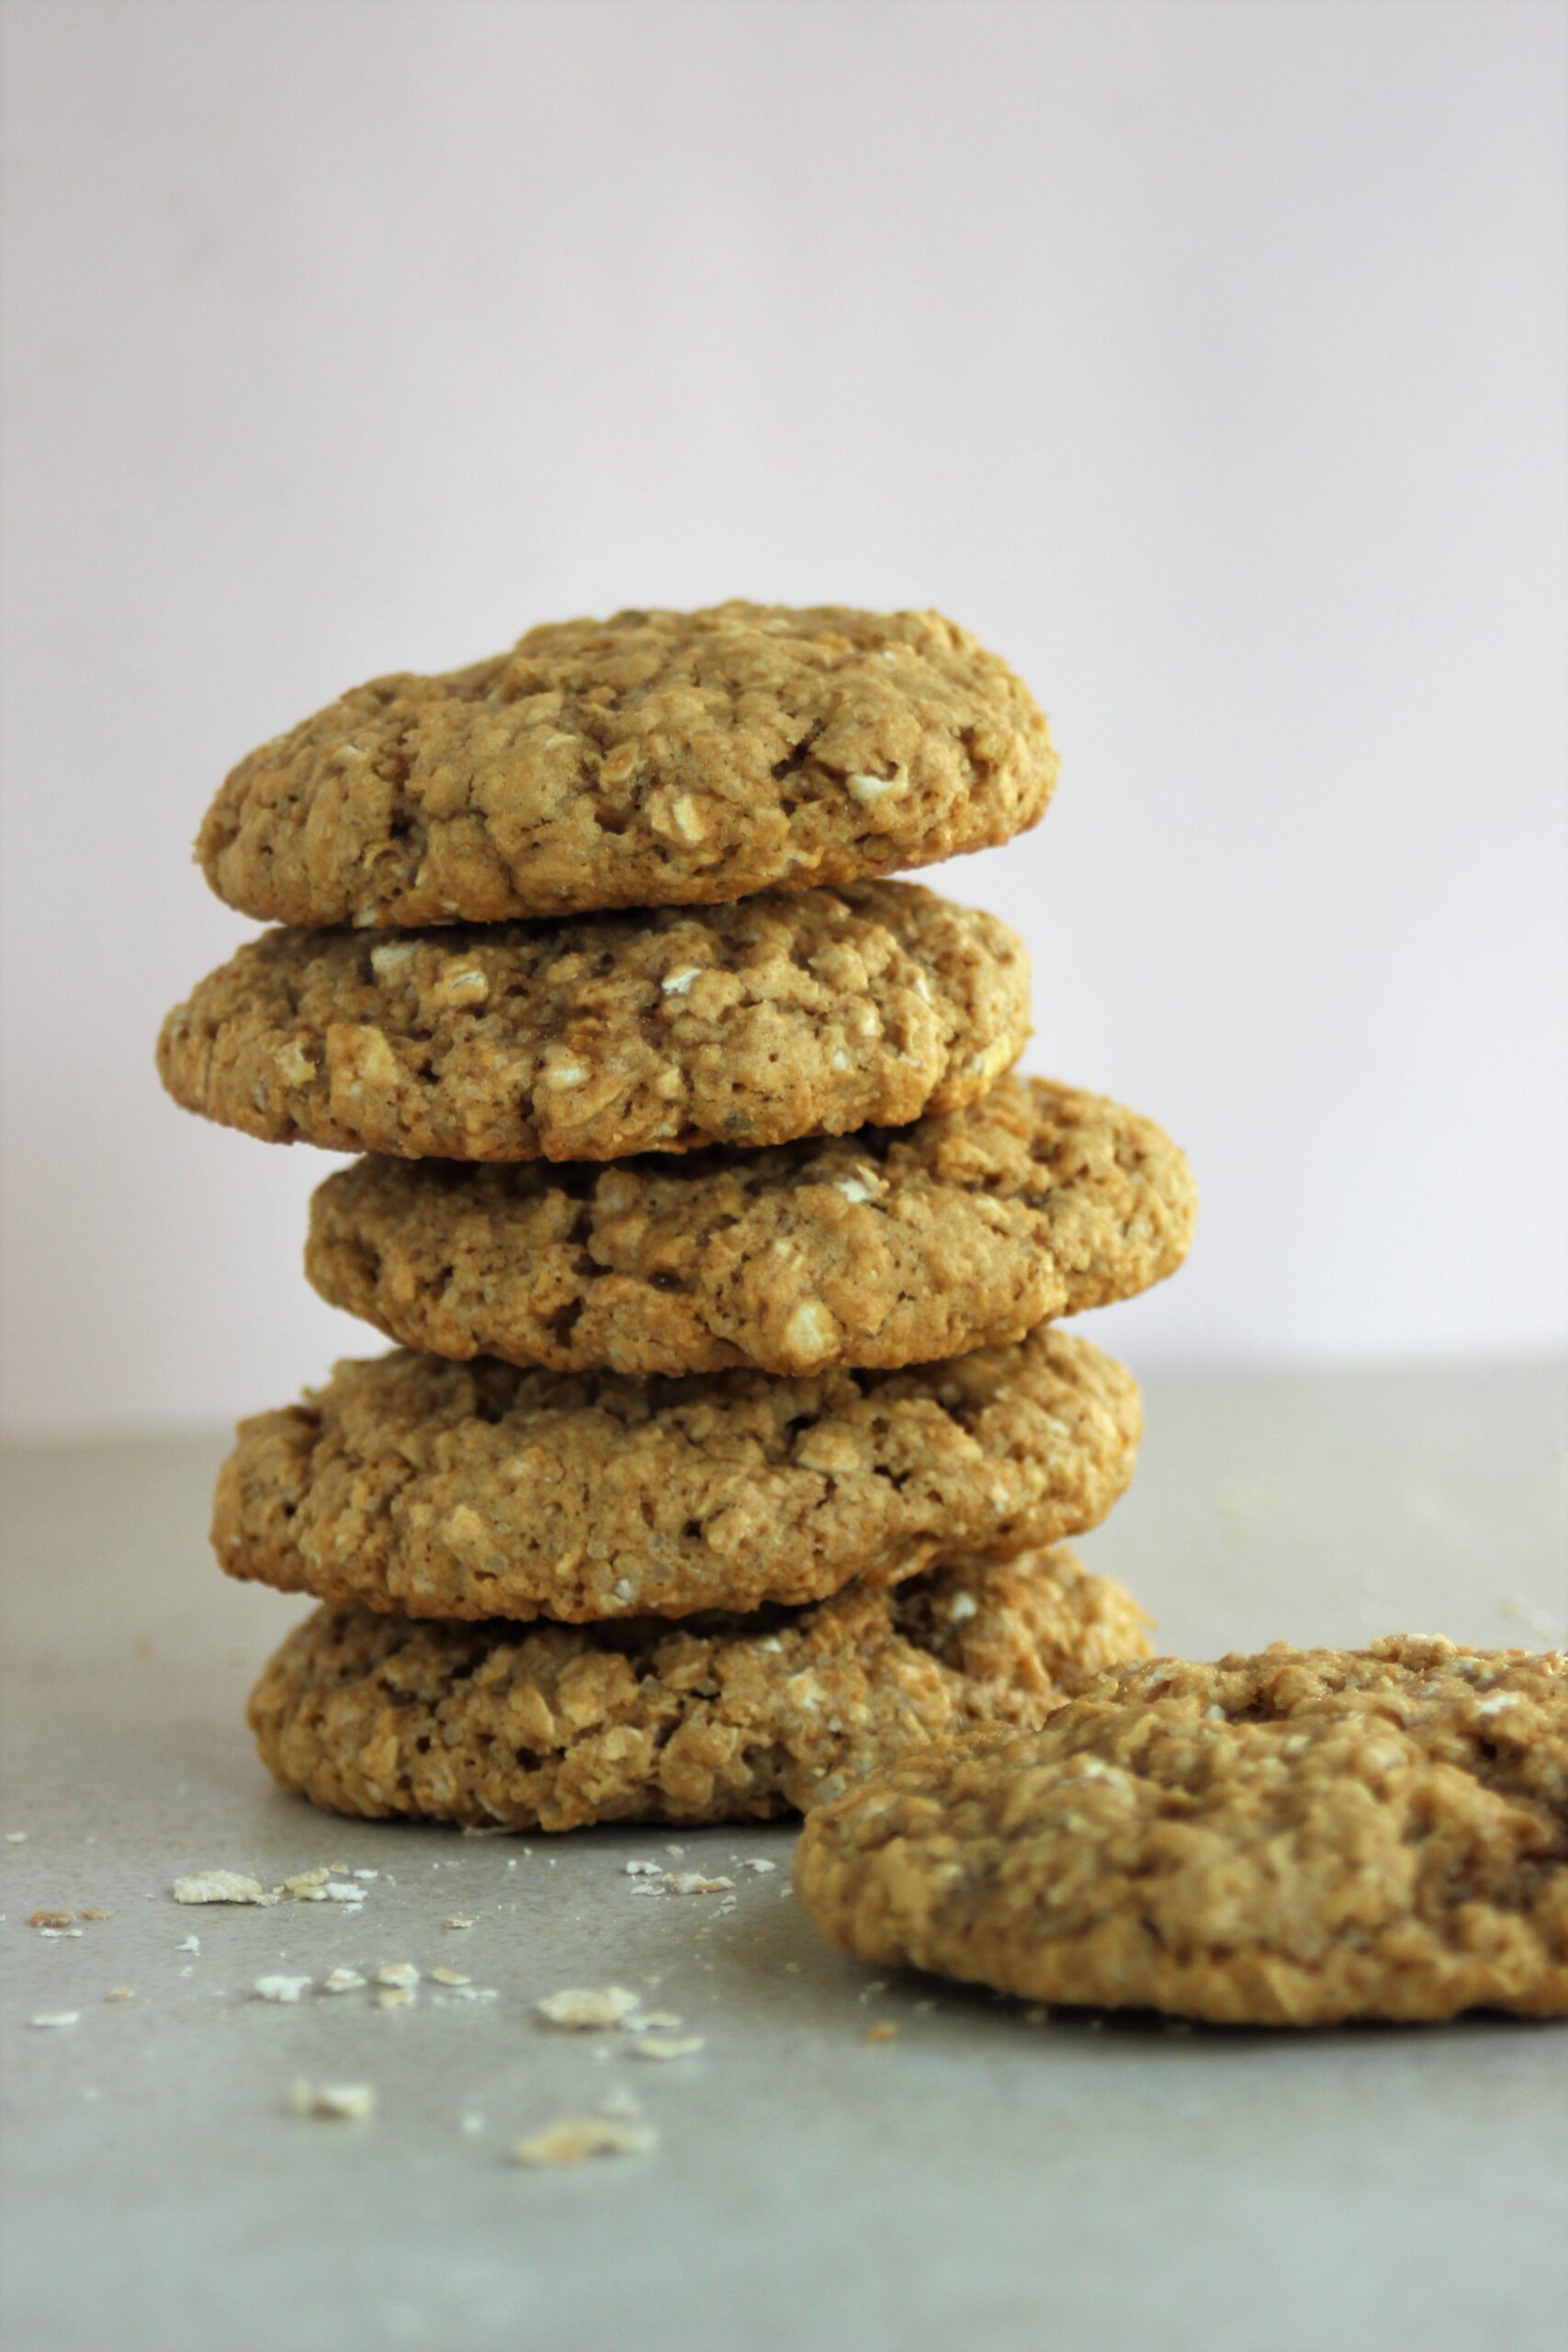 A tower of oat peanut butter cookies on a white surface.